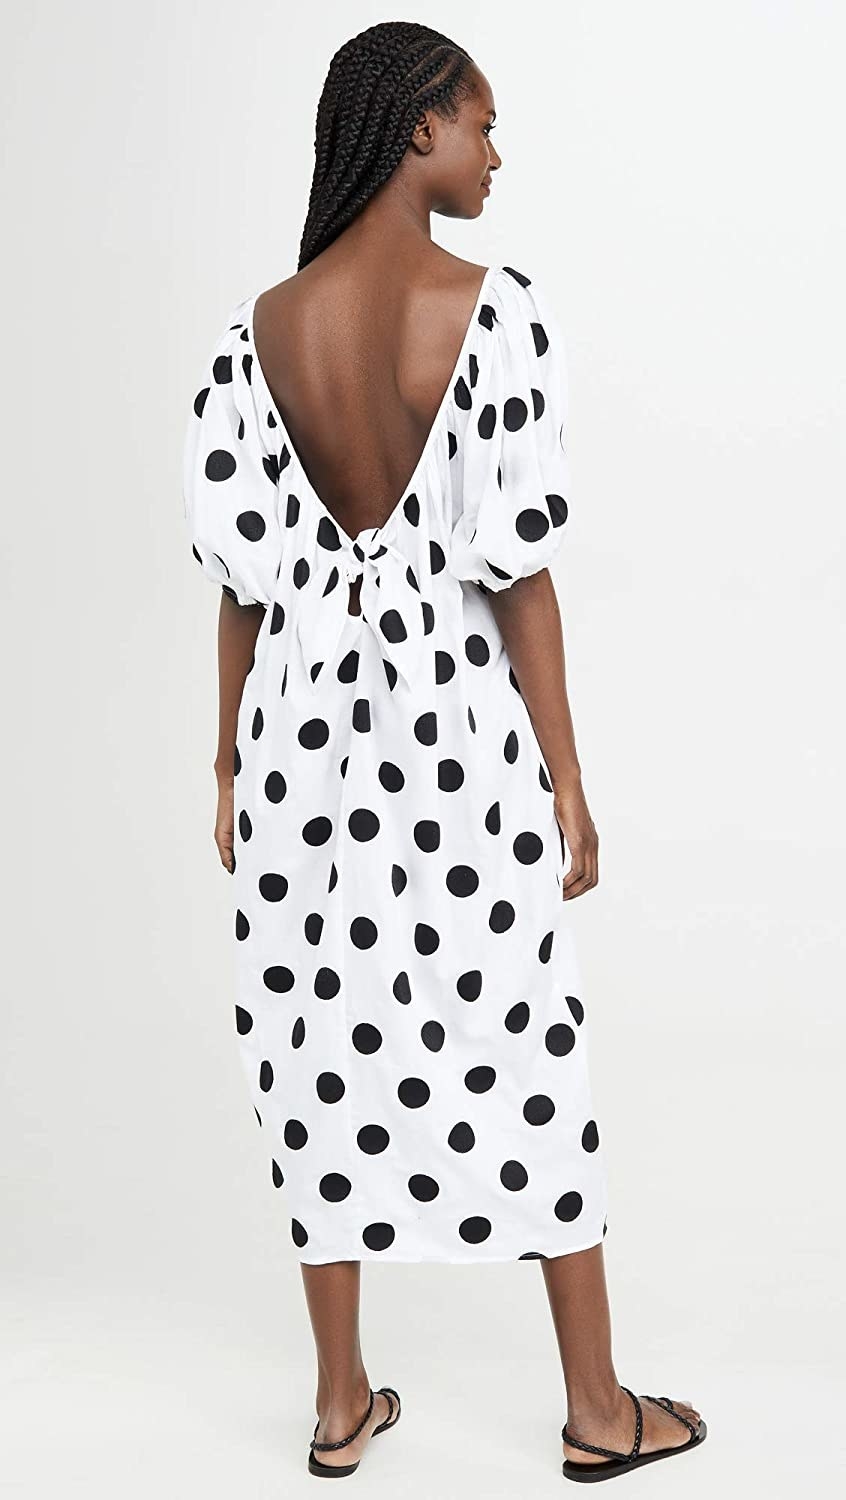 model shows back of white dress with black polka dots, deep plunge with bow at the bottom and puff sleeves